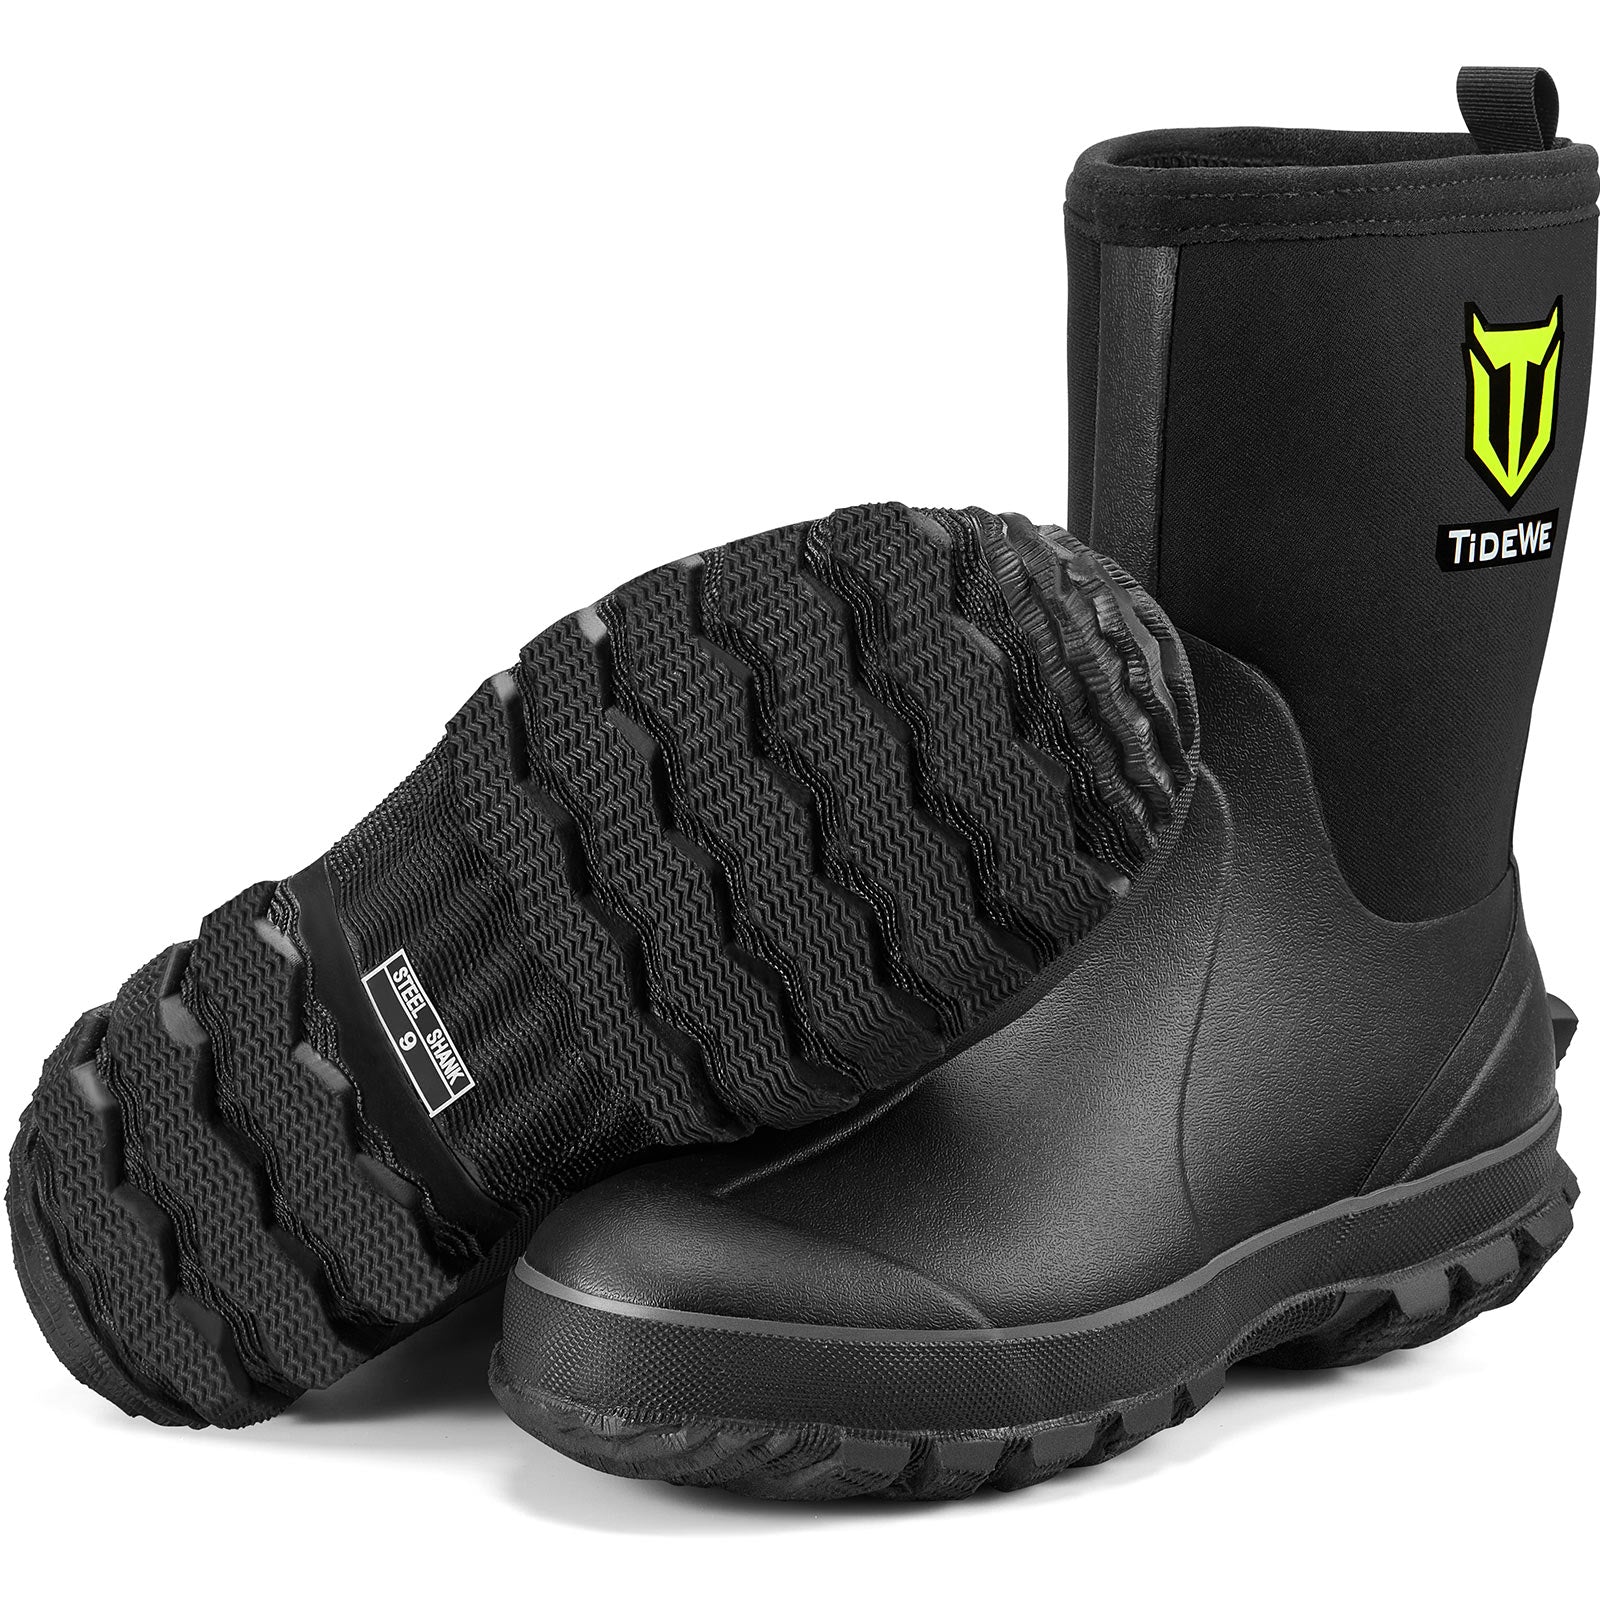  Buoy Boots Fishing Shoes for Men Waterproof - Deck Boots for  Men - Short Rain Boots Men - Ideal Wader Boots for Wet Conditions - Mens Rubber  Boots - Hunt Camo Size 8